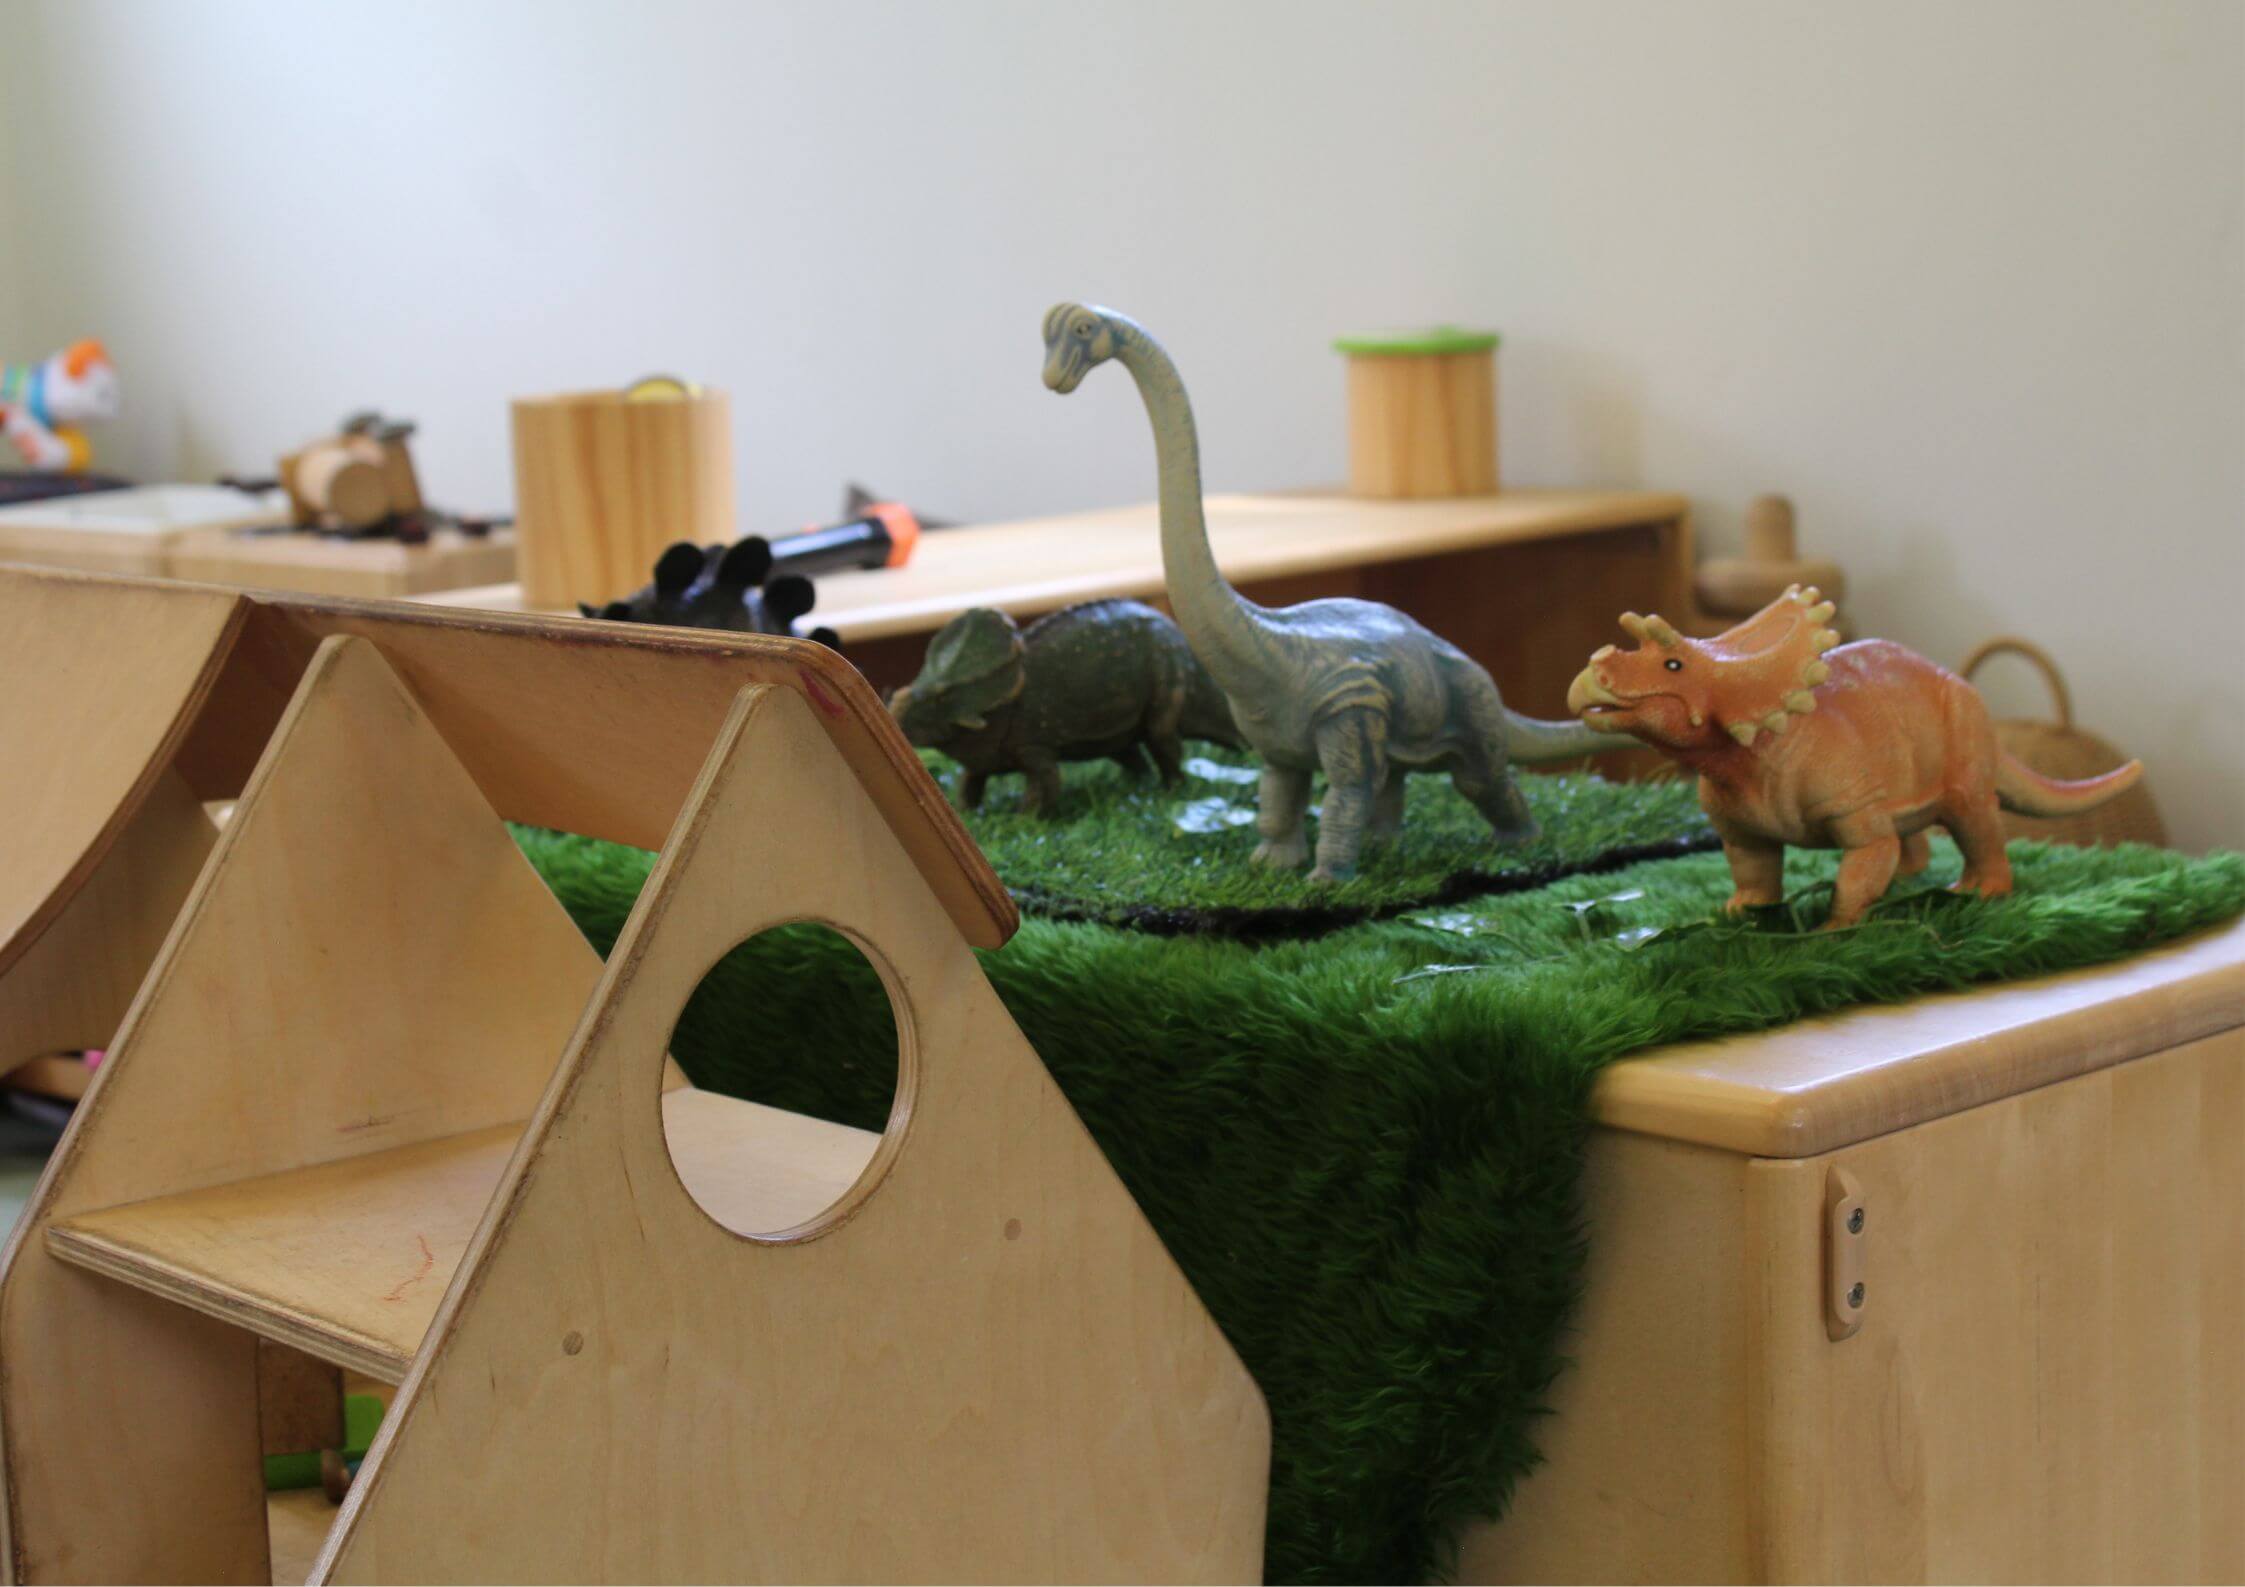 Childs play area with dinosaur toys